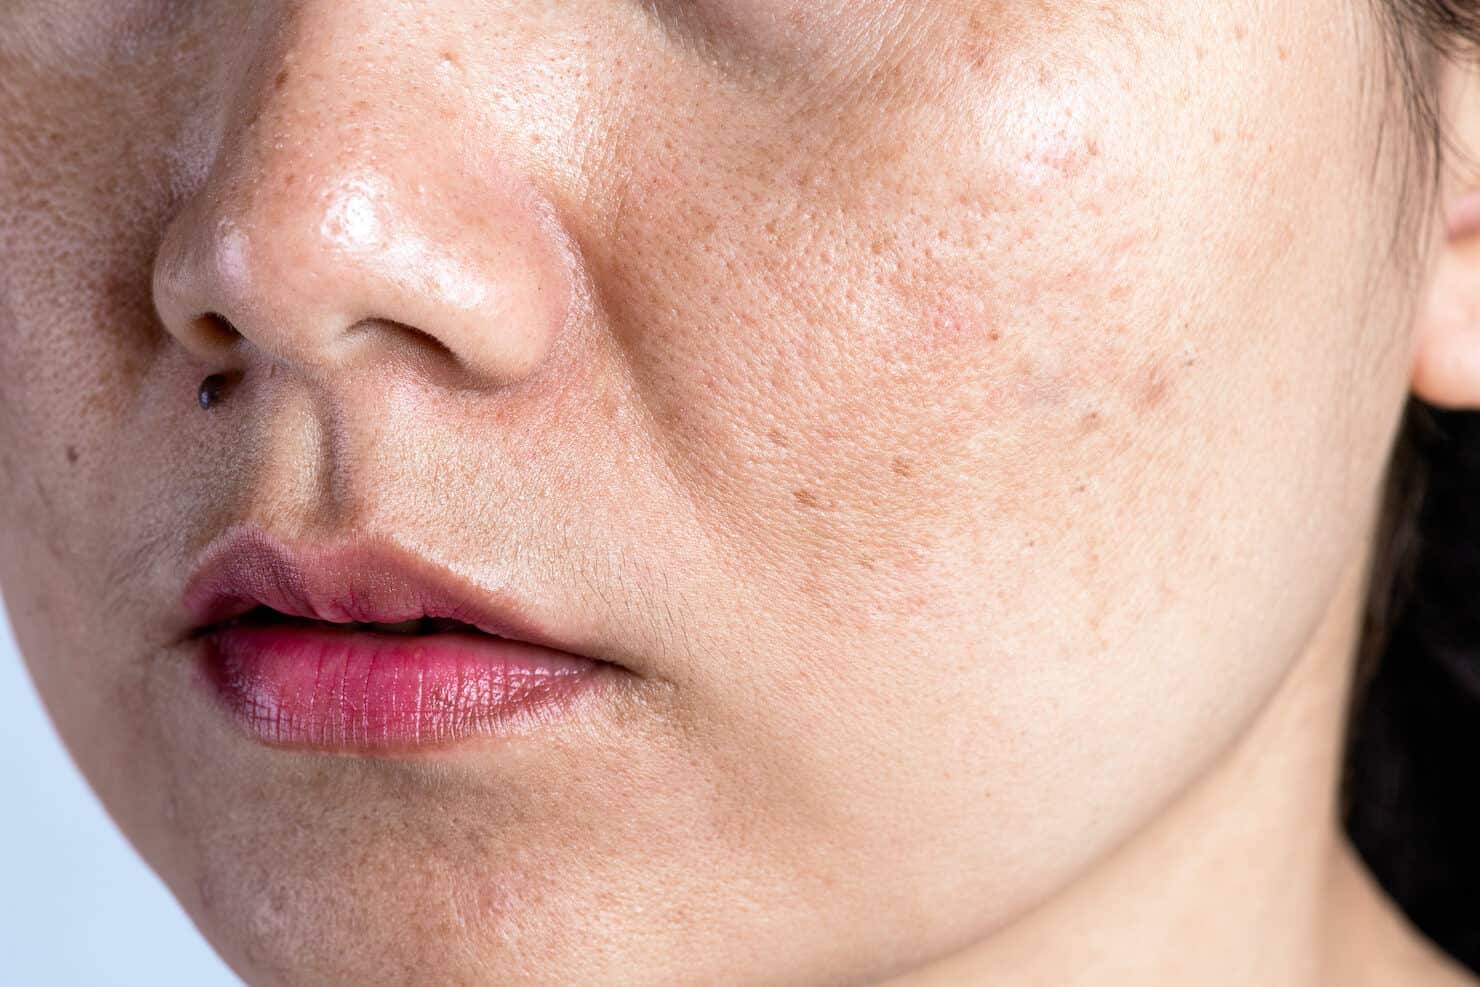 How to reduce pores on the face caused by pimples?